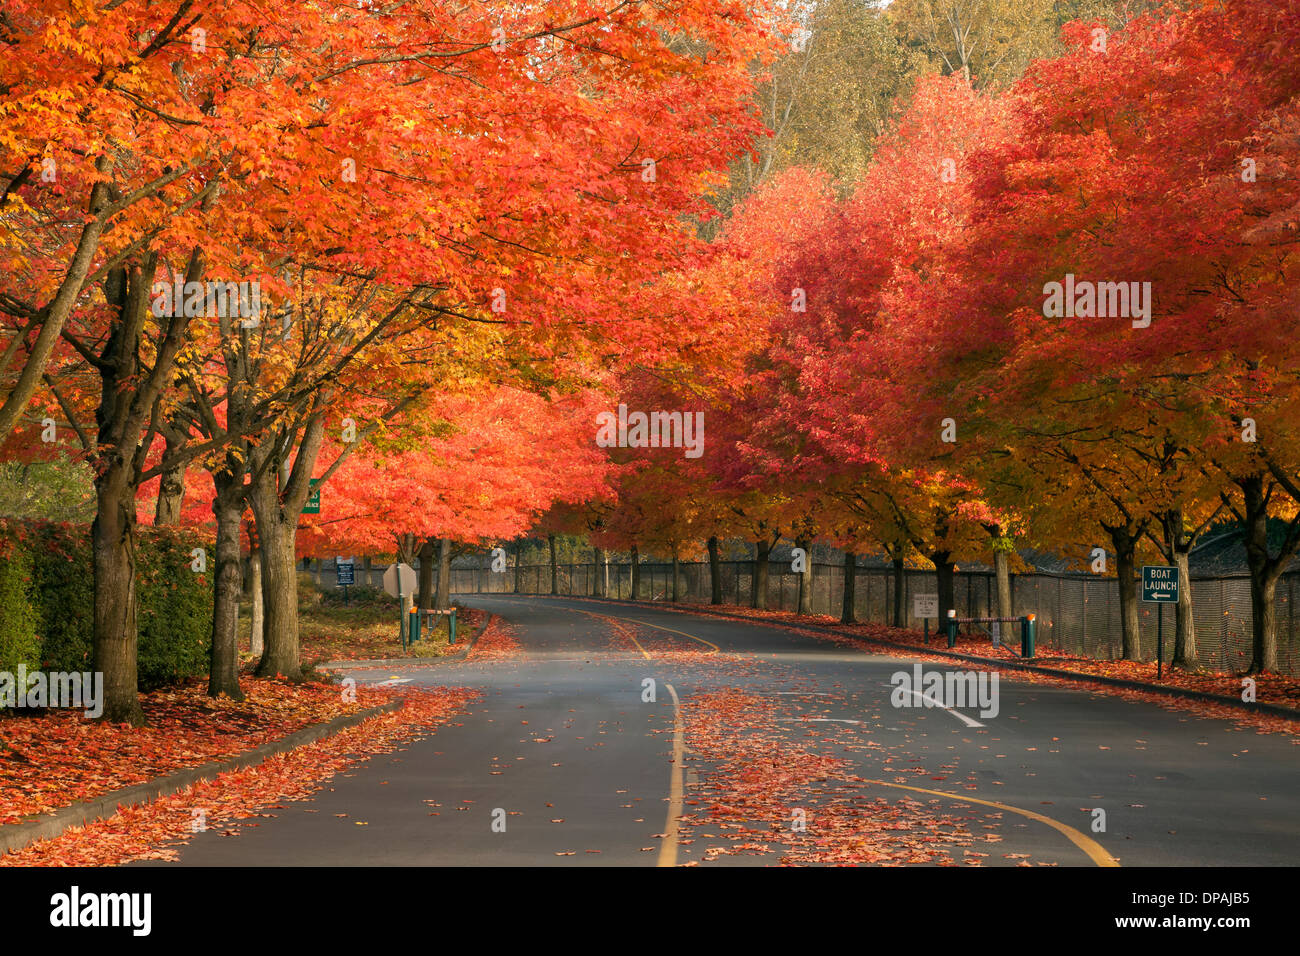 WASHINGTON - Autumn along the tree lined road at Coulon Memorial Park located at the south end of Lake Washington in Renton. Stock Photo